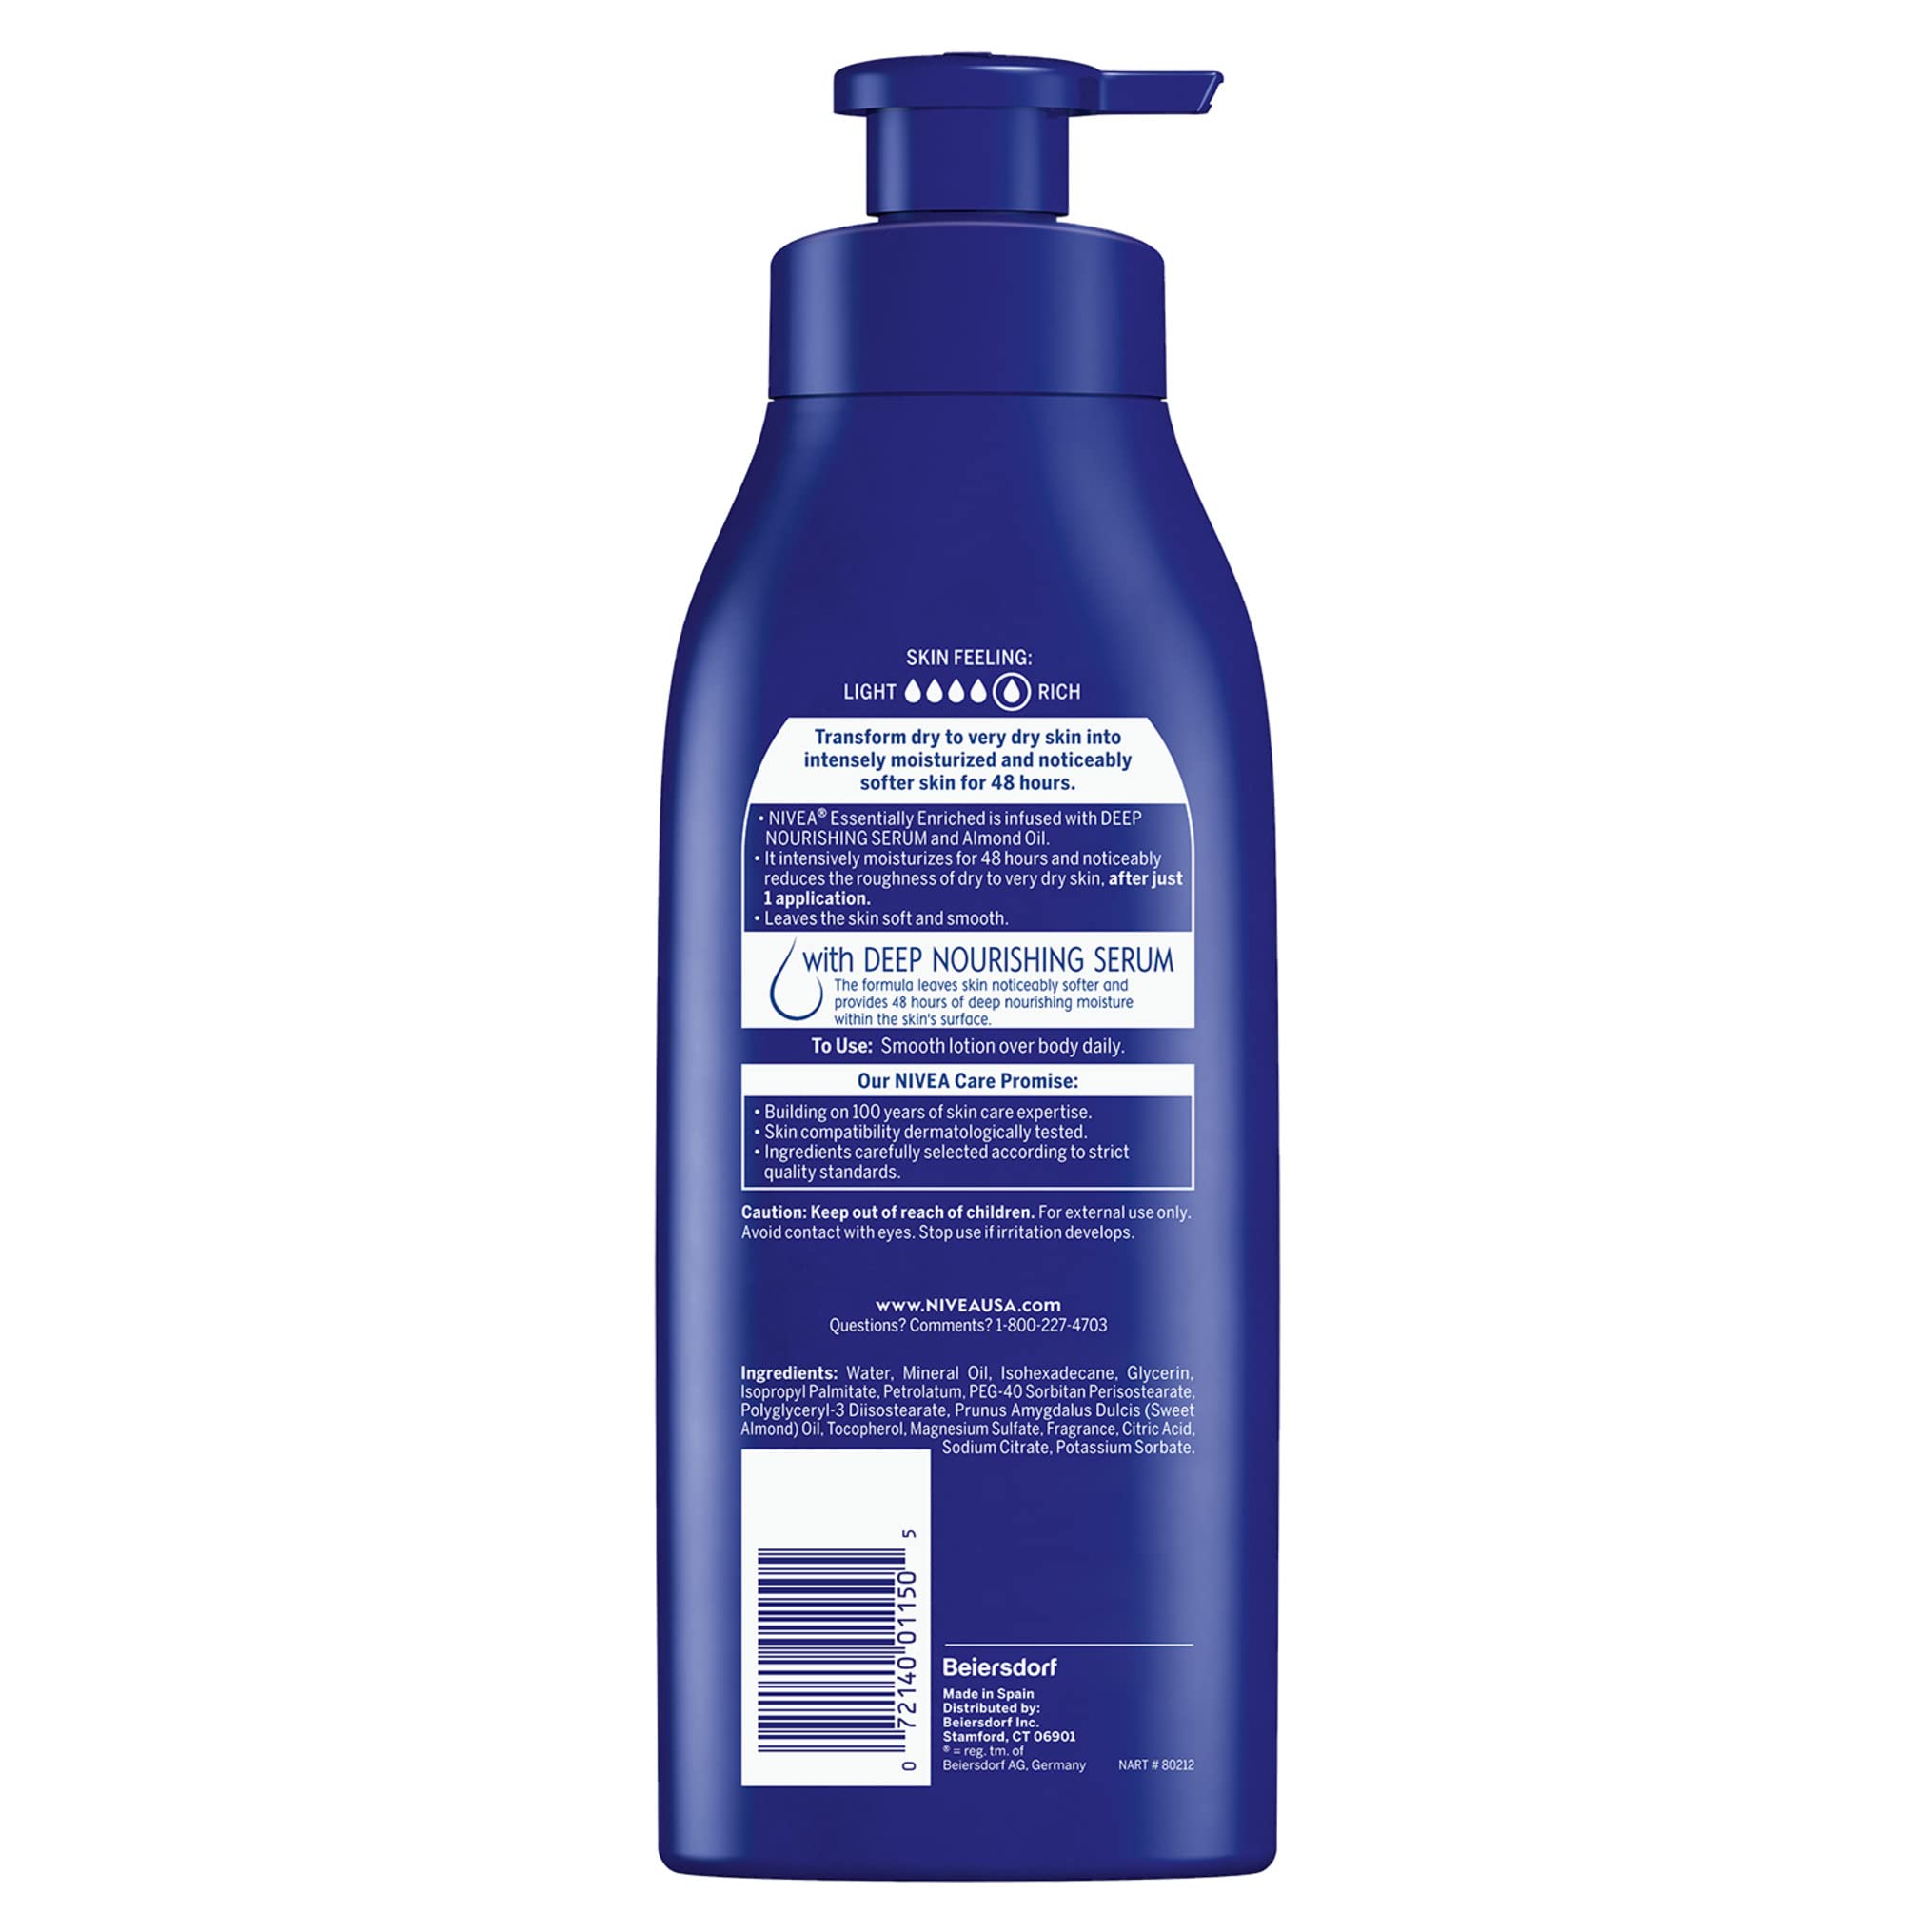 NIVEA Essentially Enriched Body Lotion for Dry Skin, Pack of 2, 16.9 Fl Oz Pump Bottles